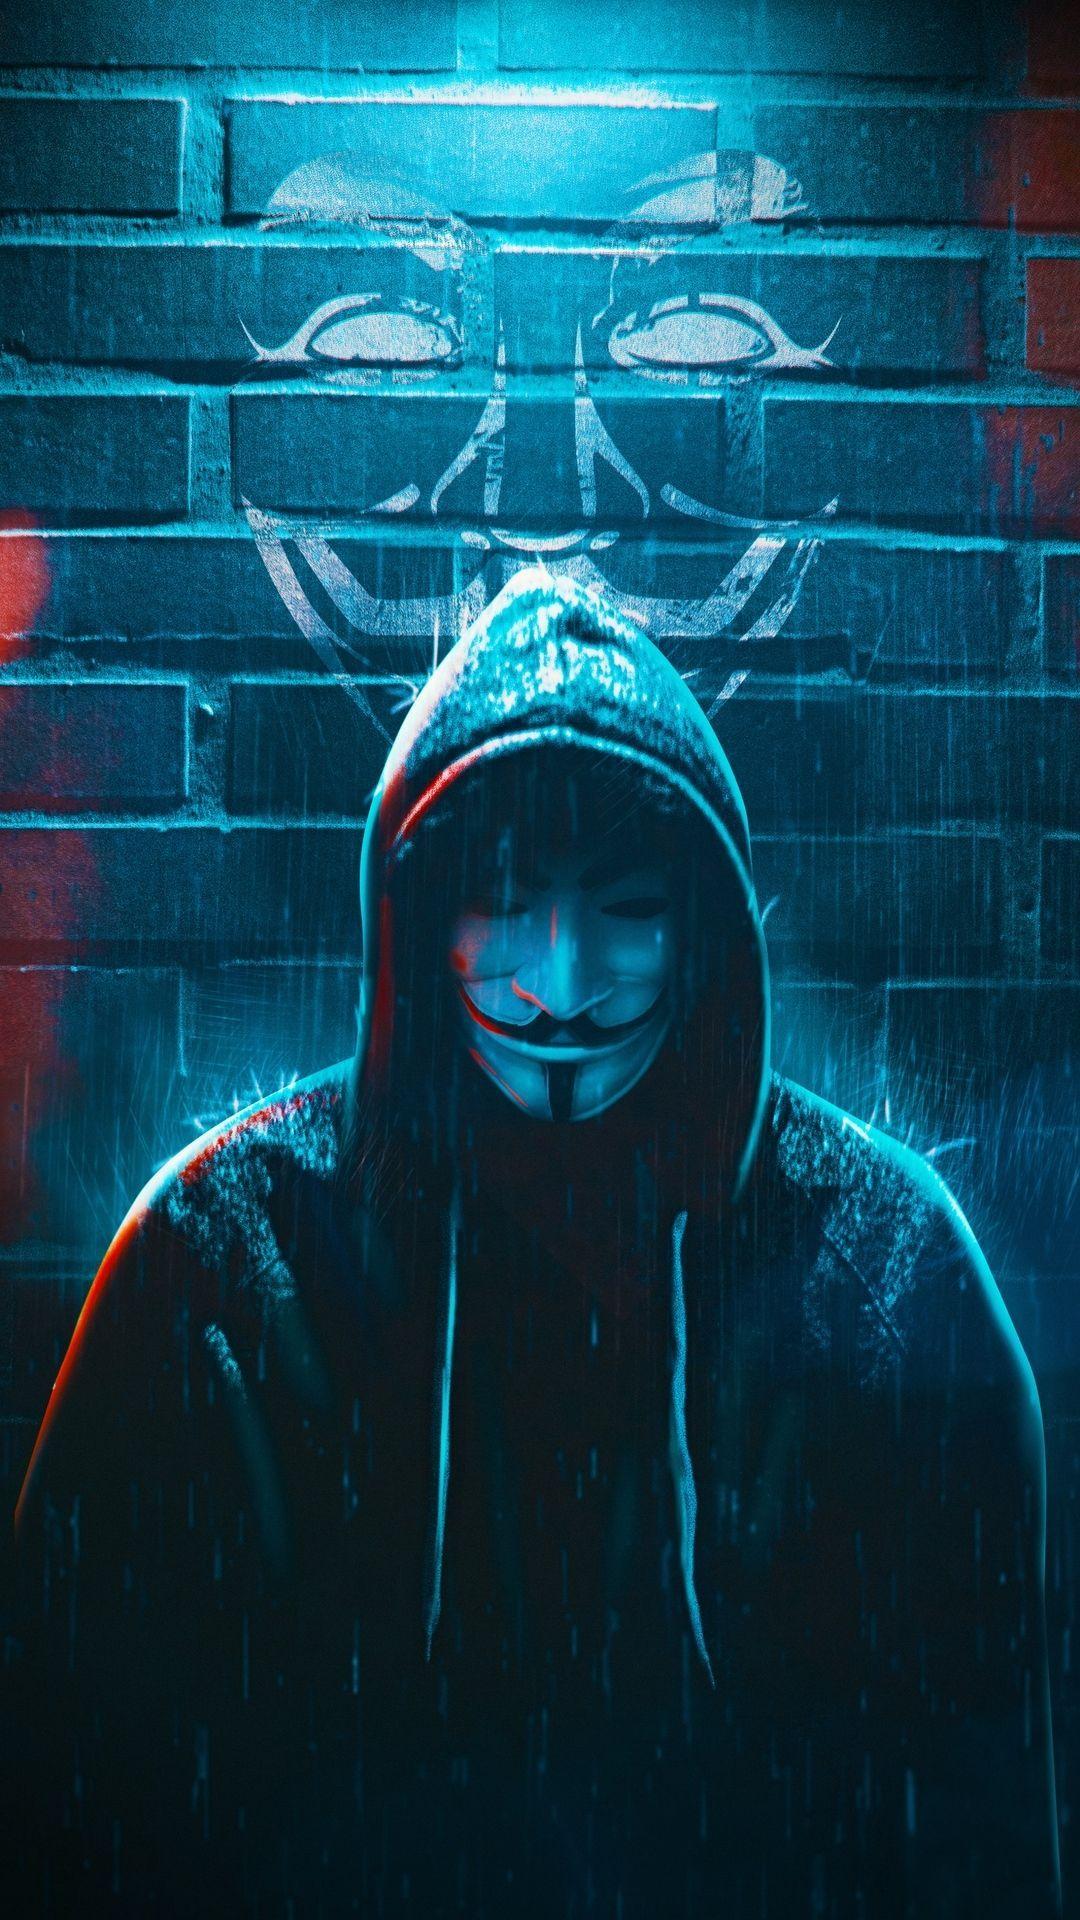 Anonymous Wallpapers APK for Android Download